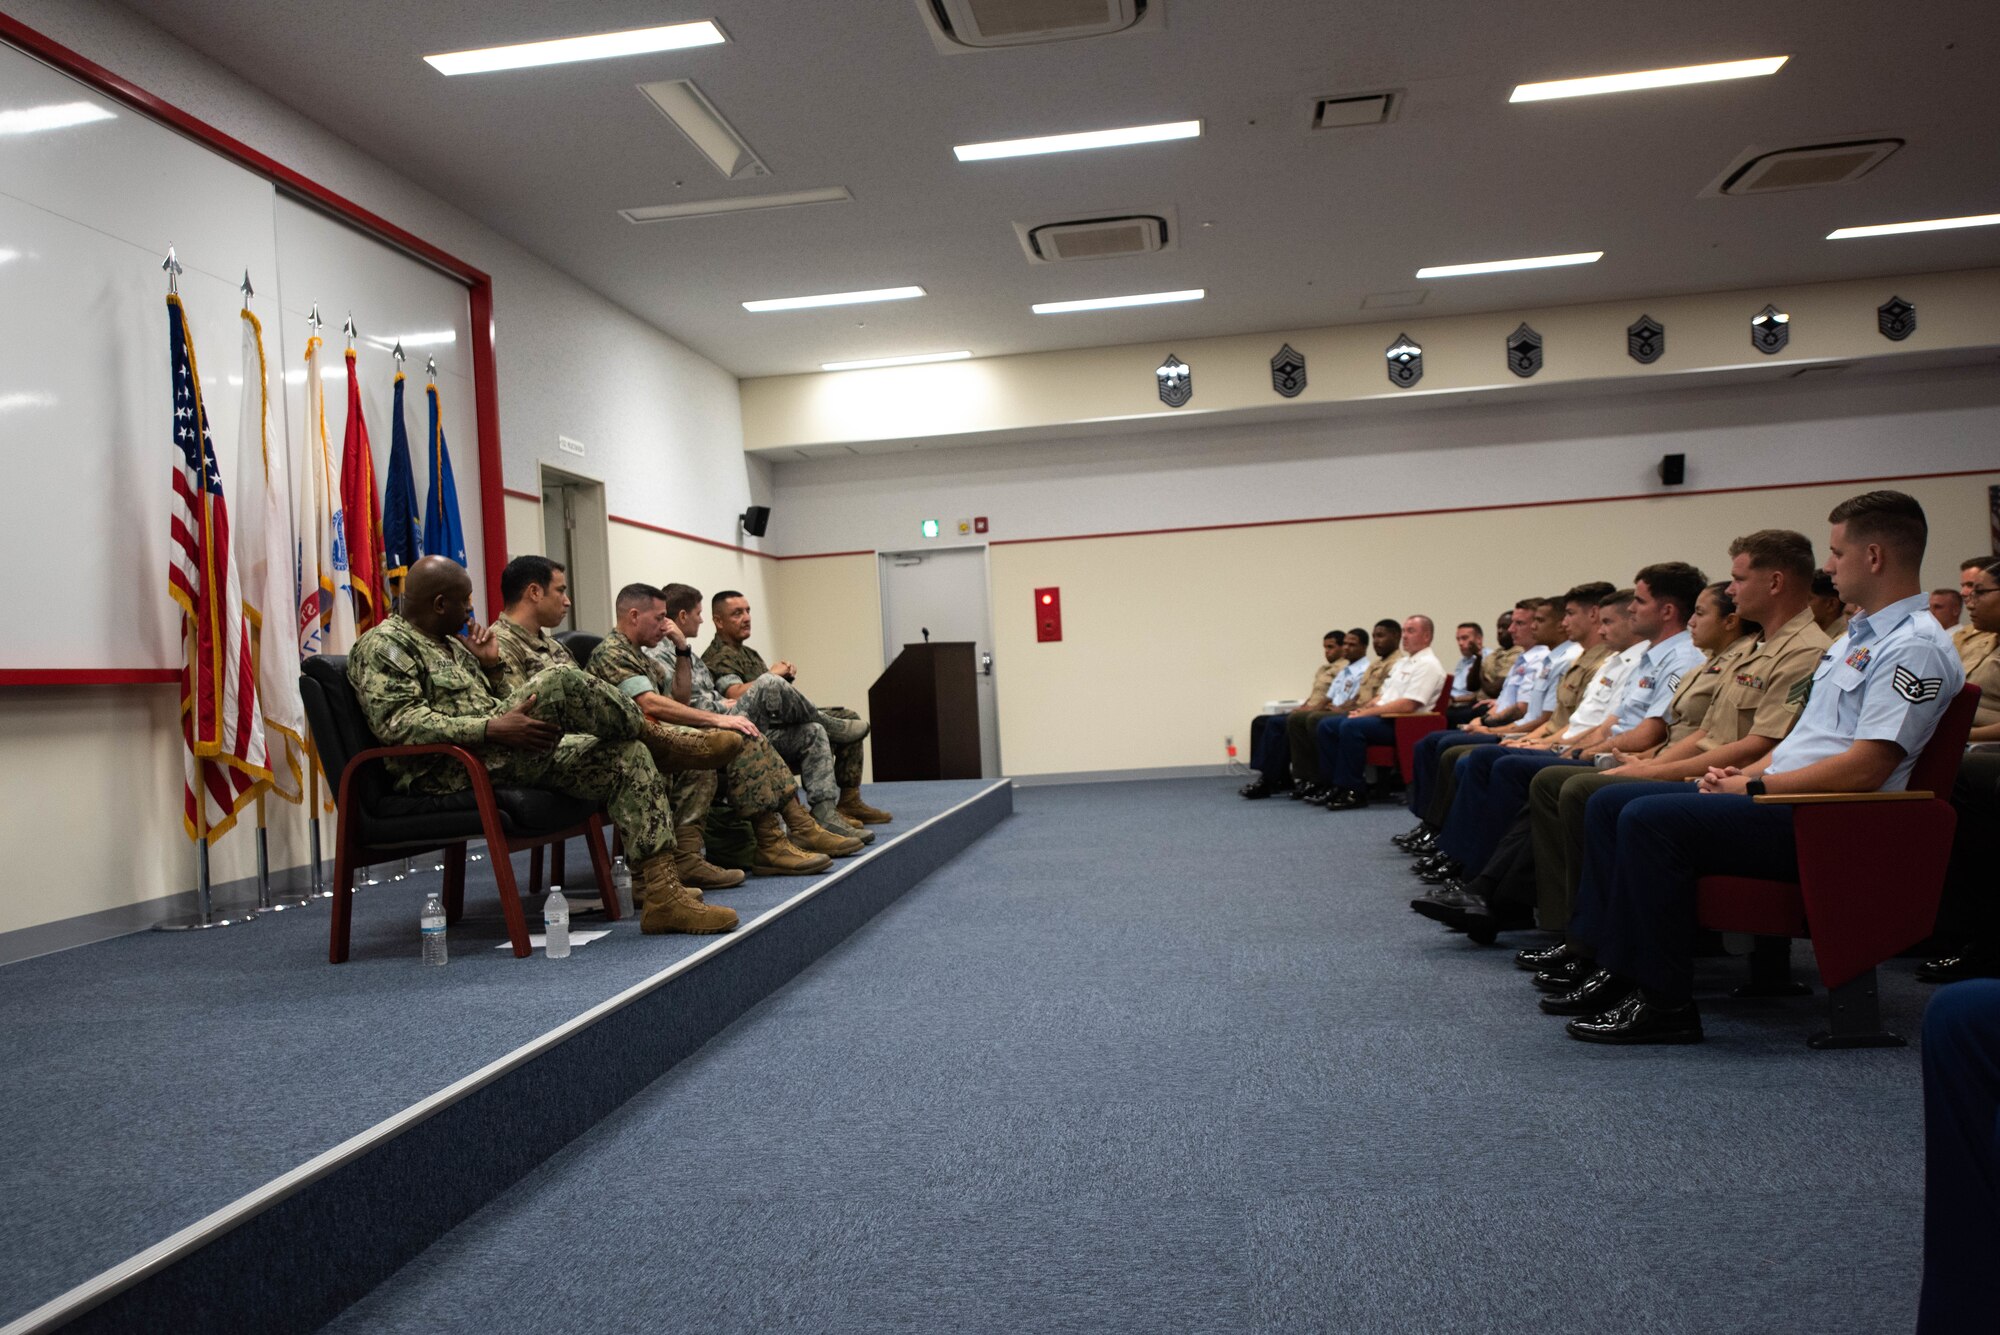 U.S. service members stationed in Okinawa participate in an Okinawa Joint Experience panel Sept. 27, 2018, at Kadena Air Base, Japan. Key leadership from each branch of service attended the panel and answered questions about the three-day course as part of the OJE. (U.S. Air Force photo by Senior Airman Kristan Campbell)